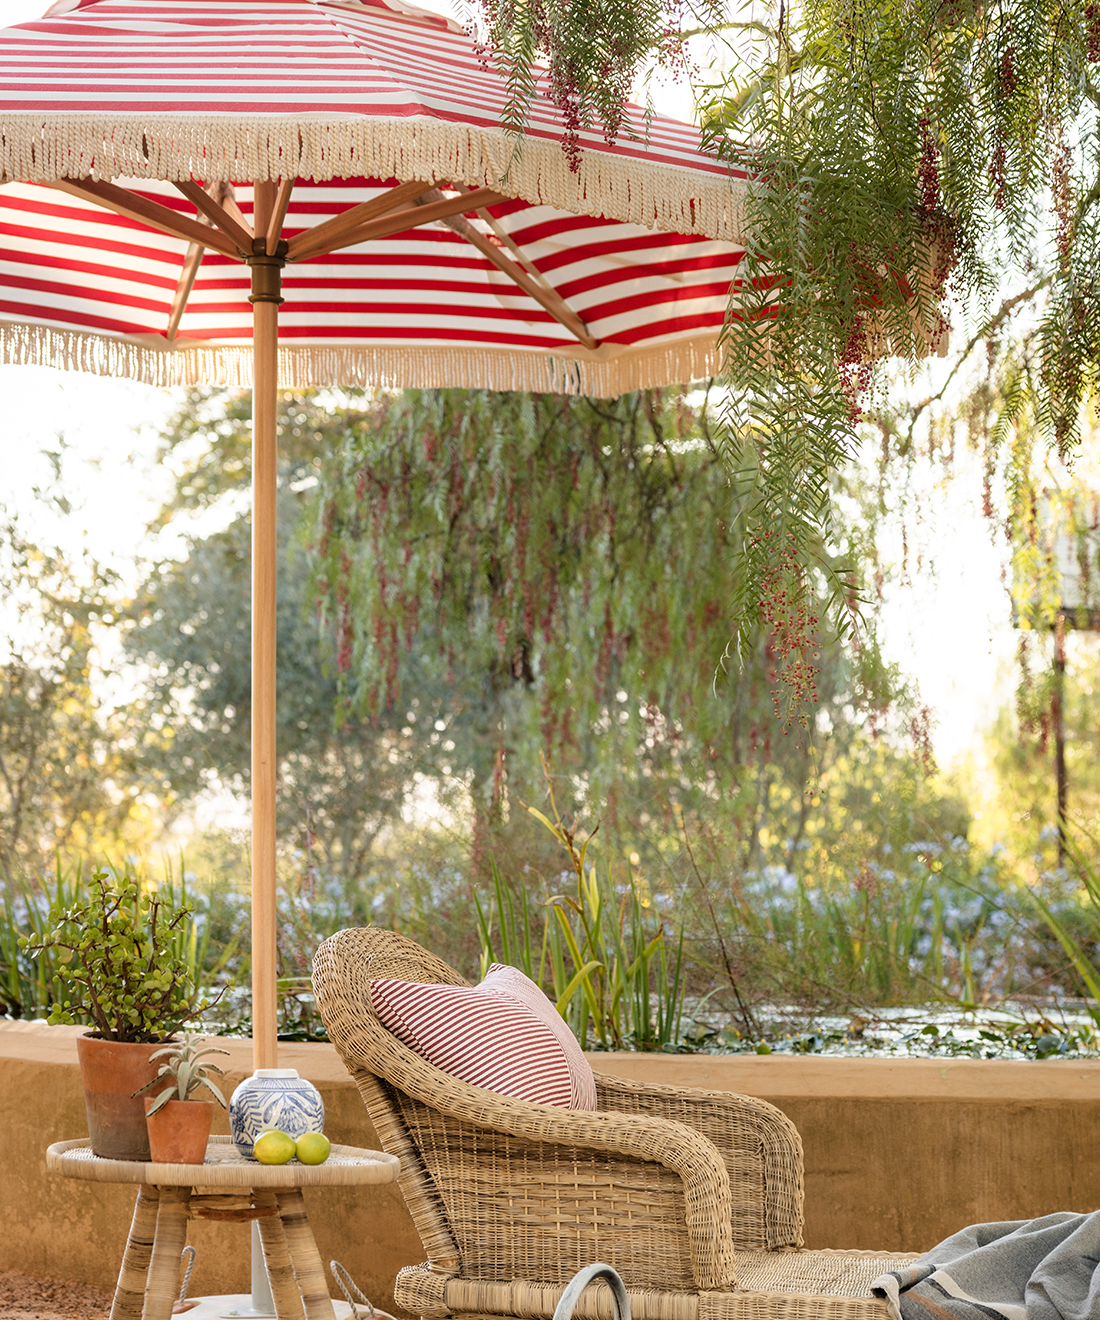 Parasol with Tassels in Red Stripe